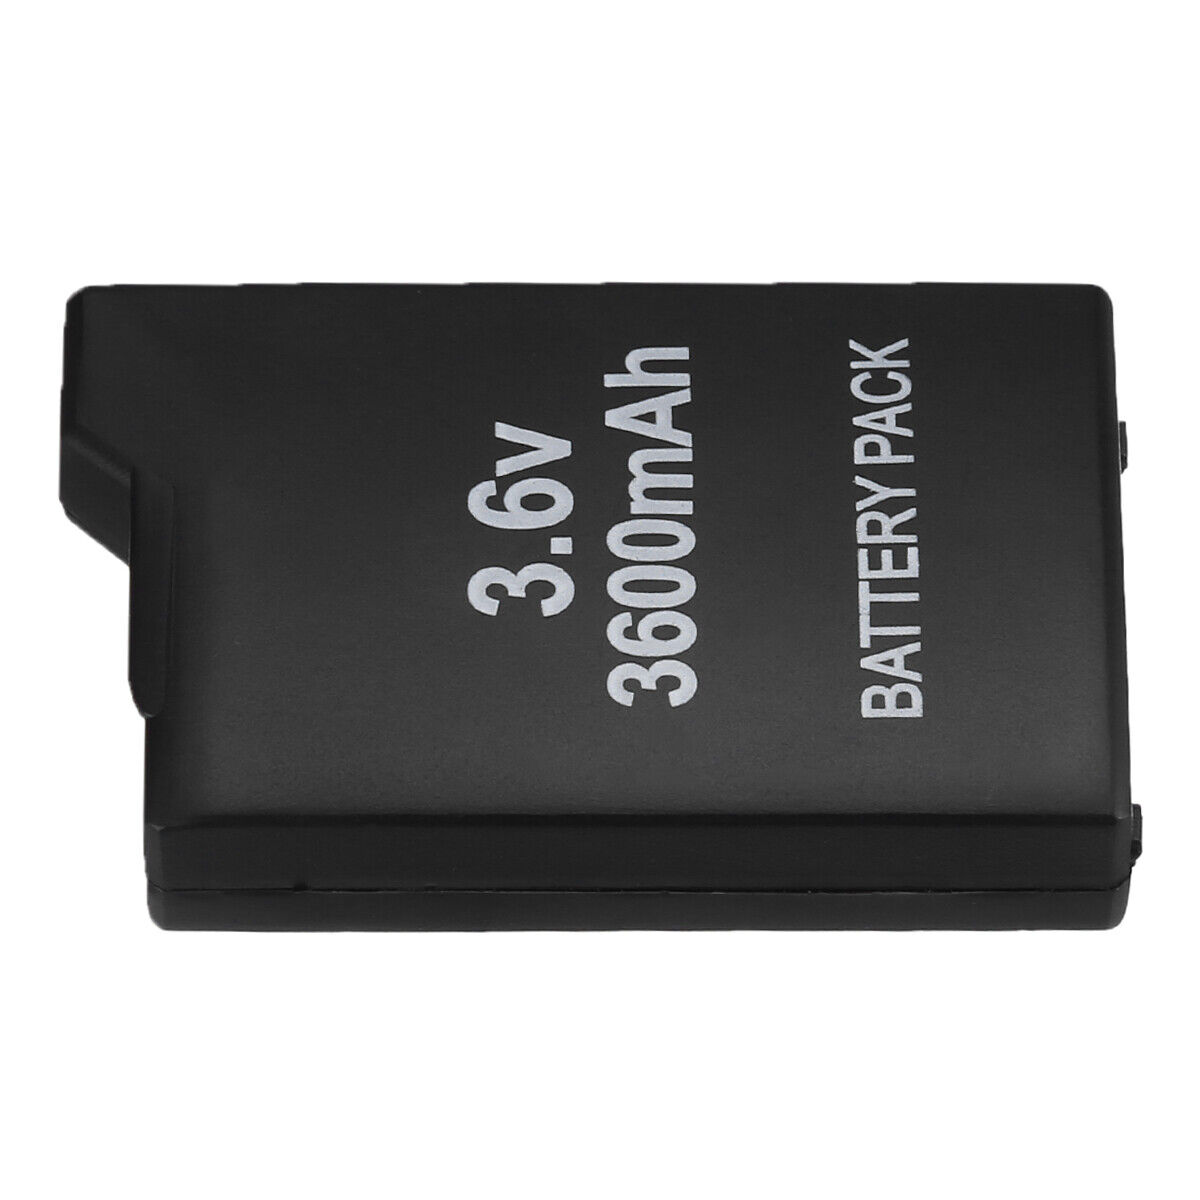 2 Pack - 3600mAh Replacement Battery Packs for Sony PSP PSP-1000 1000 1001 Unbranded Does not apply - фотография #11